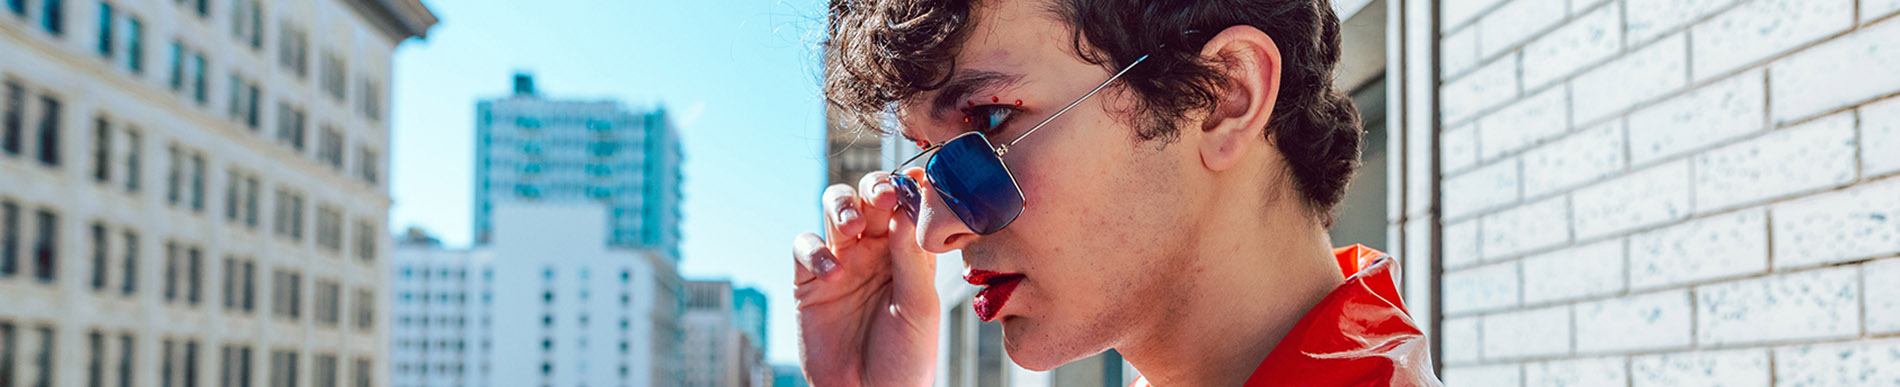 young male with red lipstick and sunglasses pulled down over his nose and looking into the distance